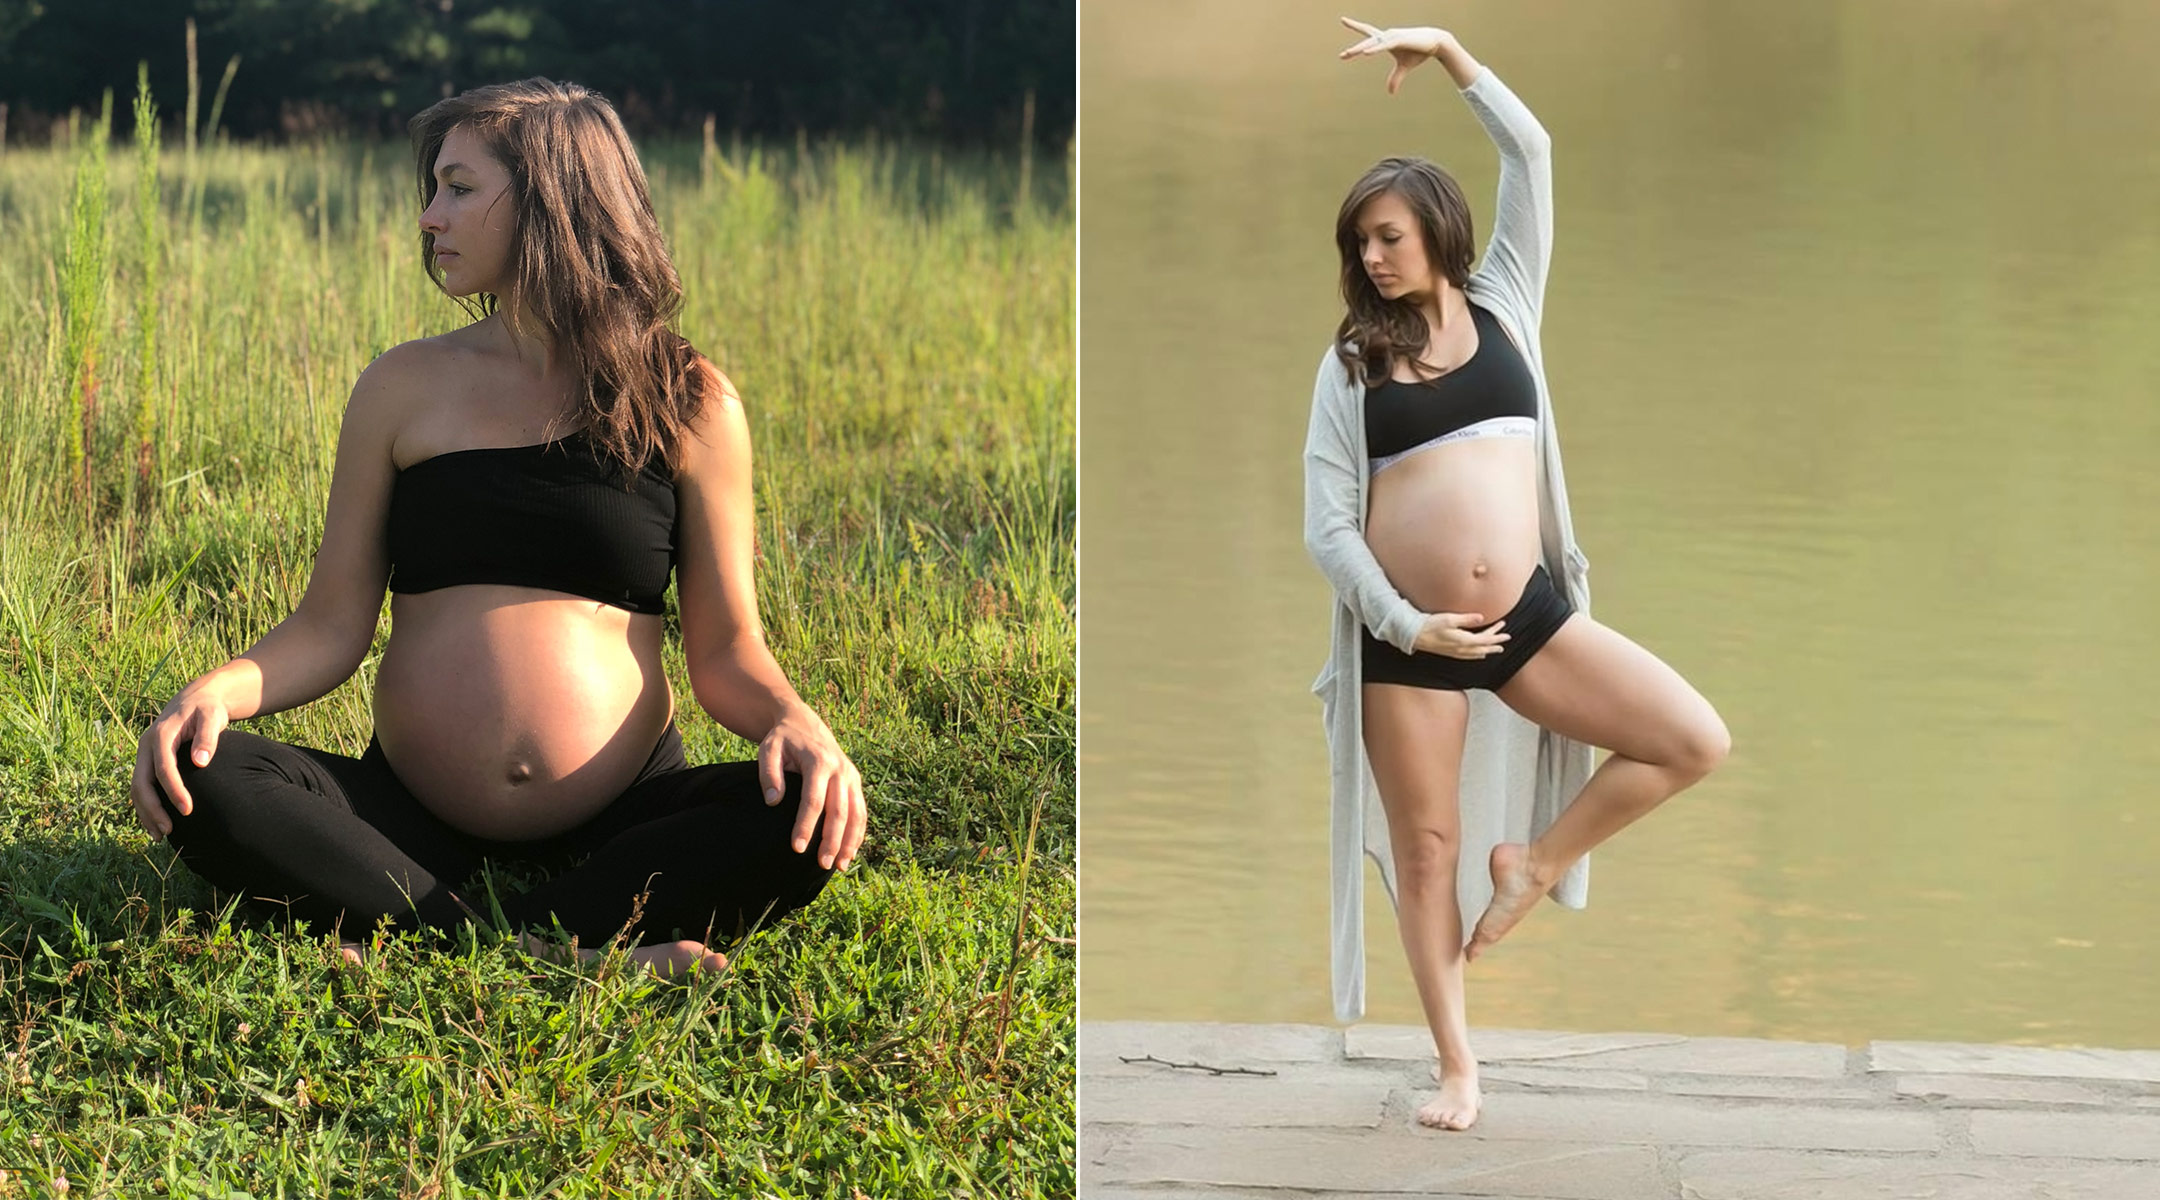 What to Know About Taking Barre Classes During Pregnancy image pic